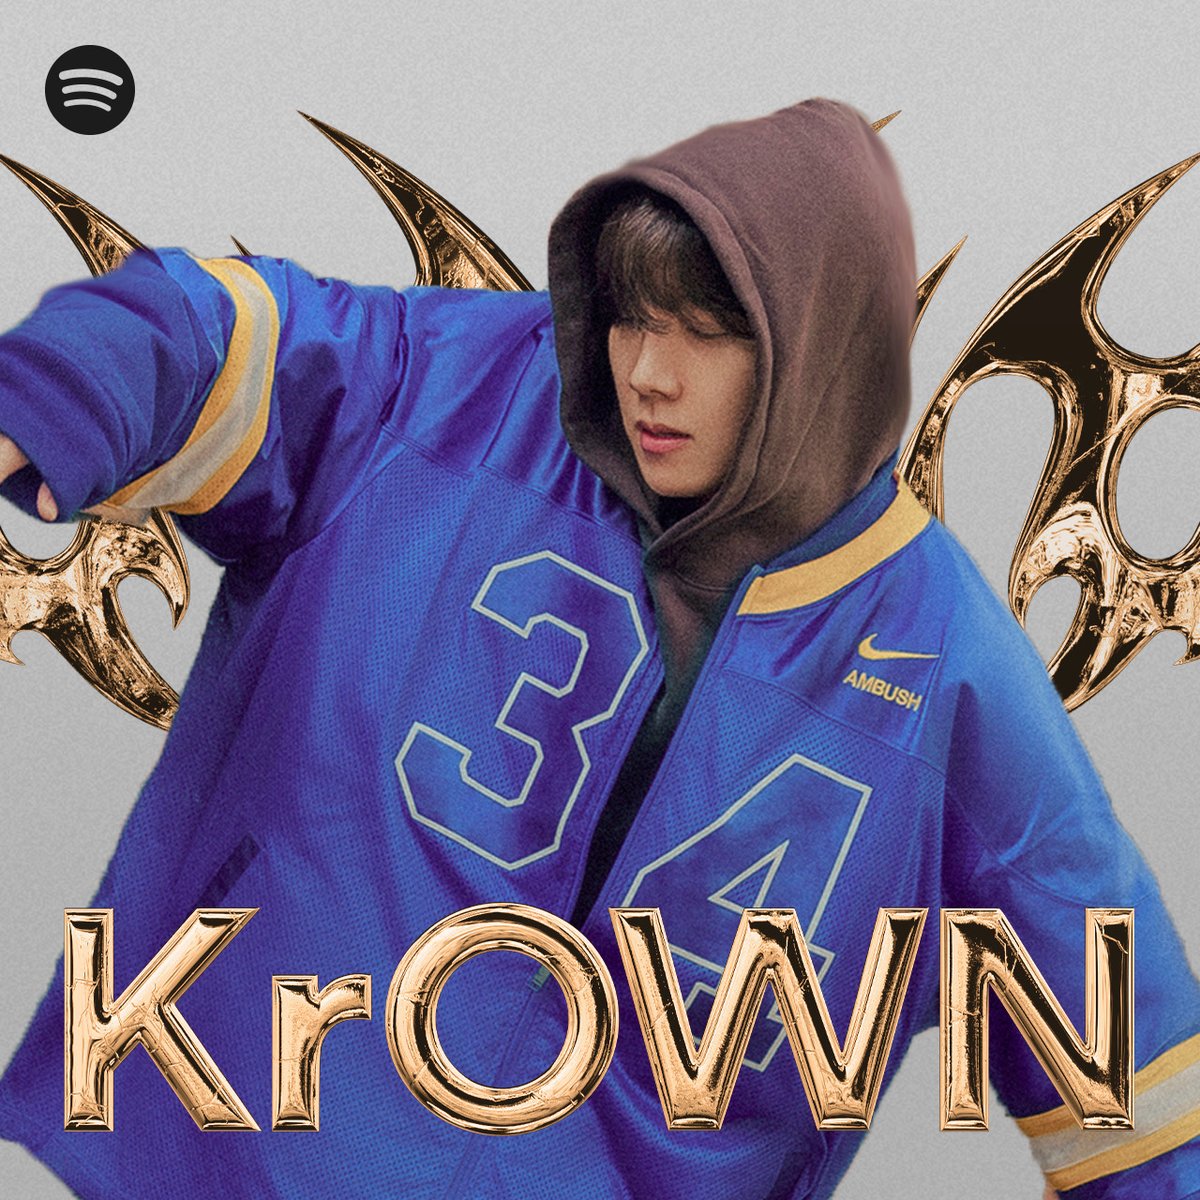 Check out j-hope 'NEURON (with Gaeko, yoonmirae)' on KrOWN @spotify right here! 🎧 open.spotify.com/playlist/37i9d… #jhope_NEURON #HOPE_ON_THE_STREET #홉온스 #jhope #제이홉